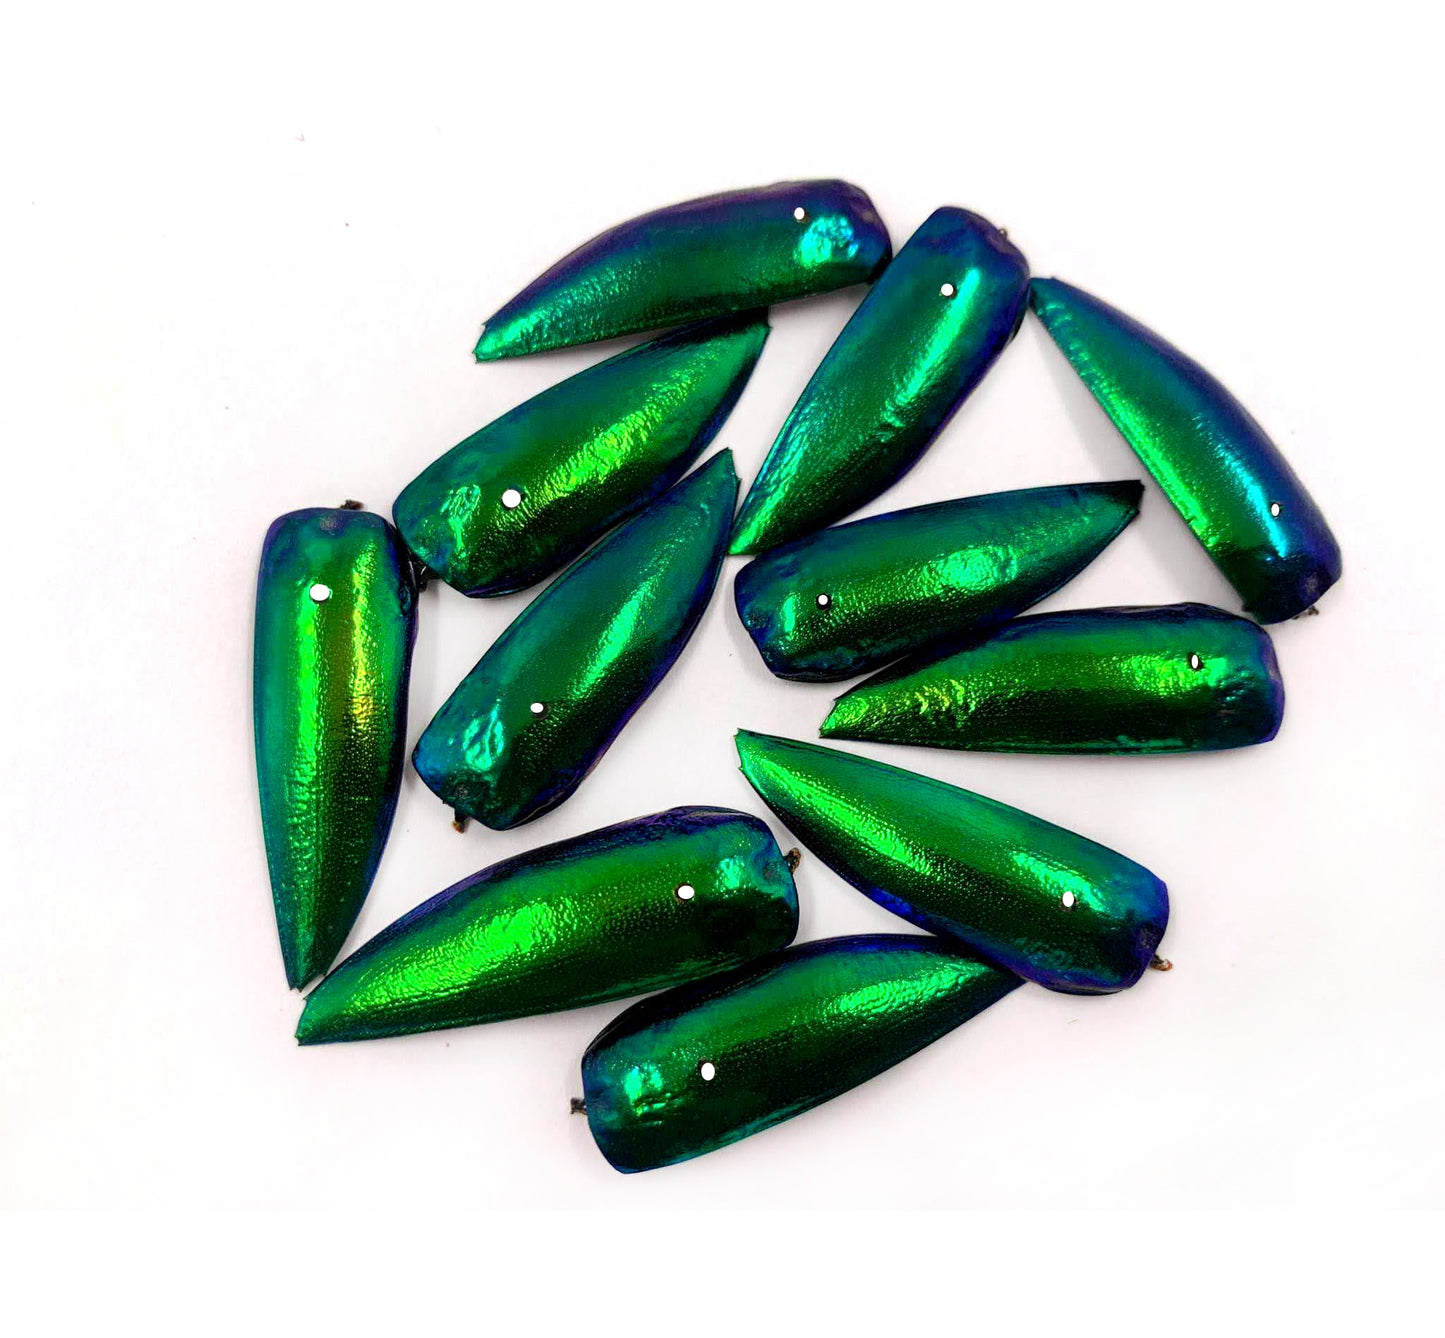 Jewel Beetle Wings DRILLED with HOLE 100 Pcs Natural Wings - Green TOP 2